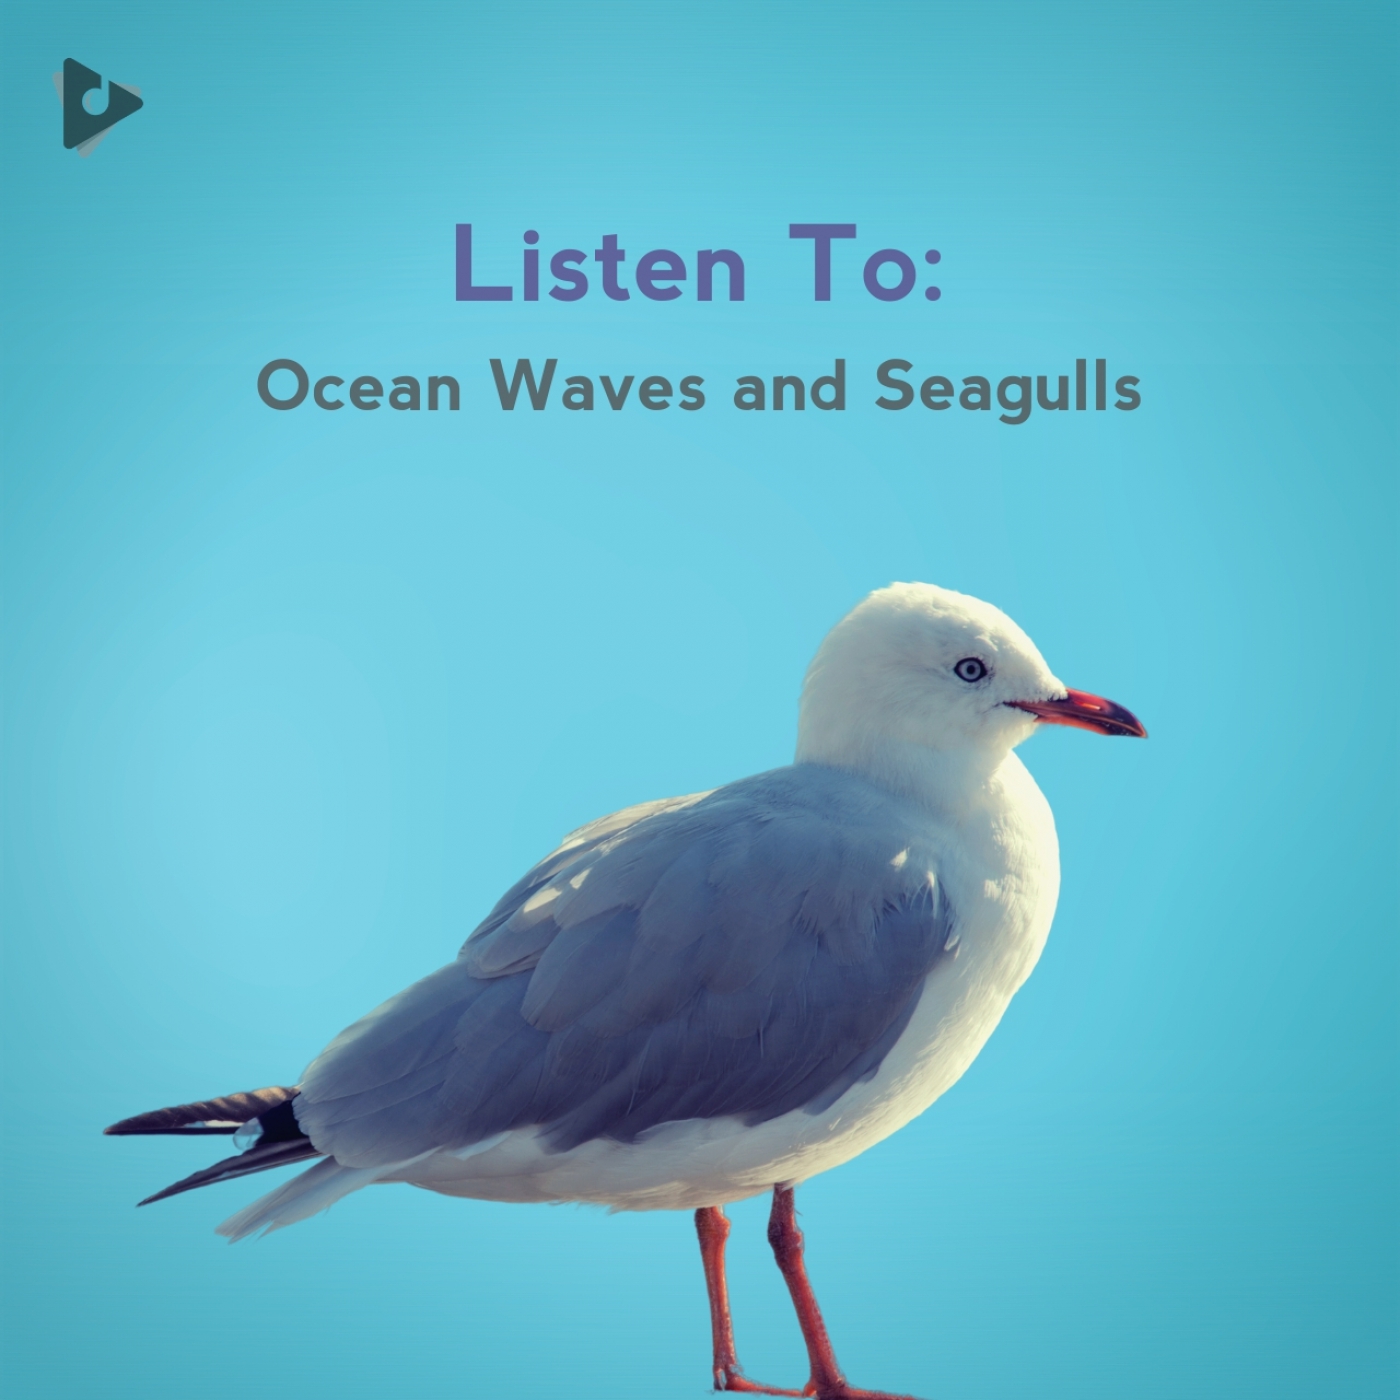 Listen To: Ocean Waves and Seagulls